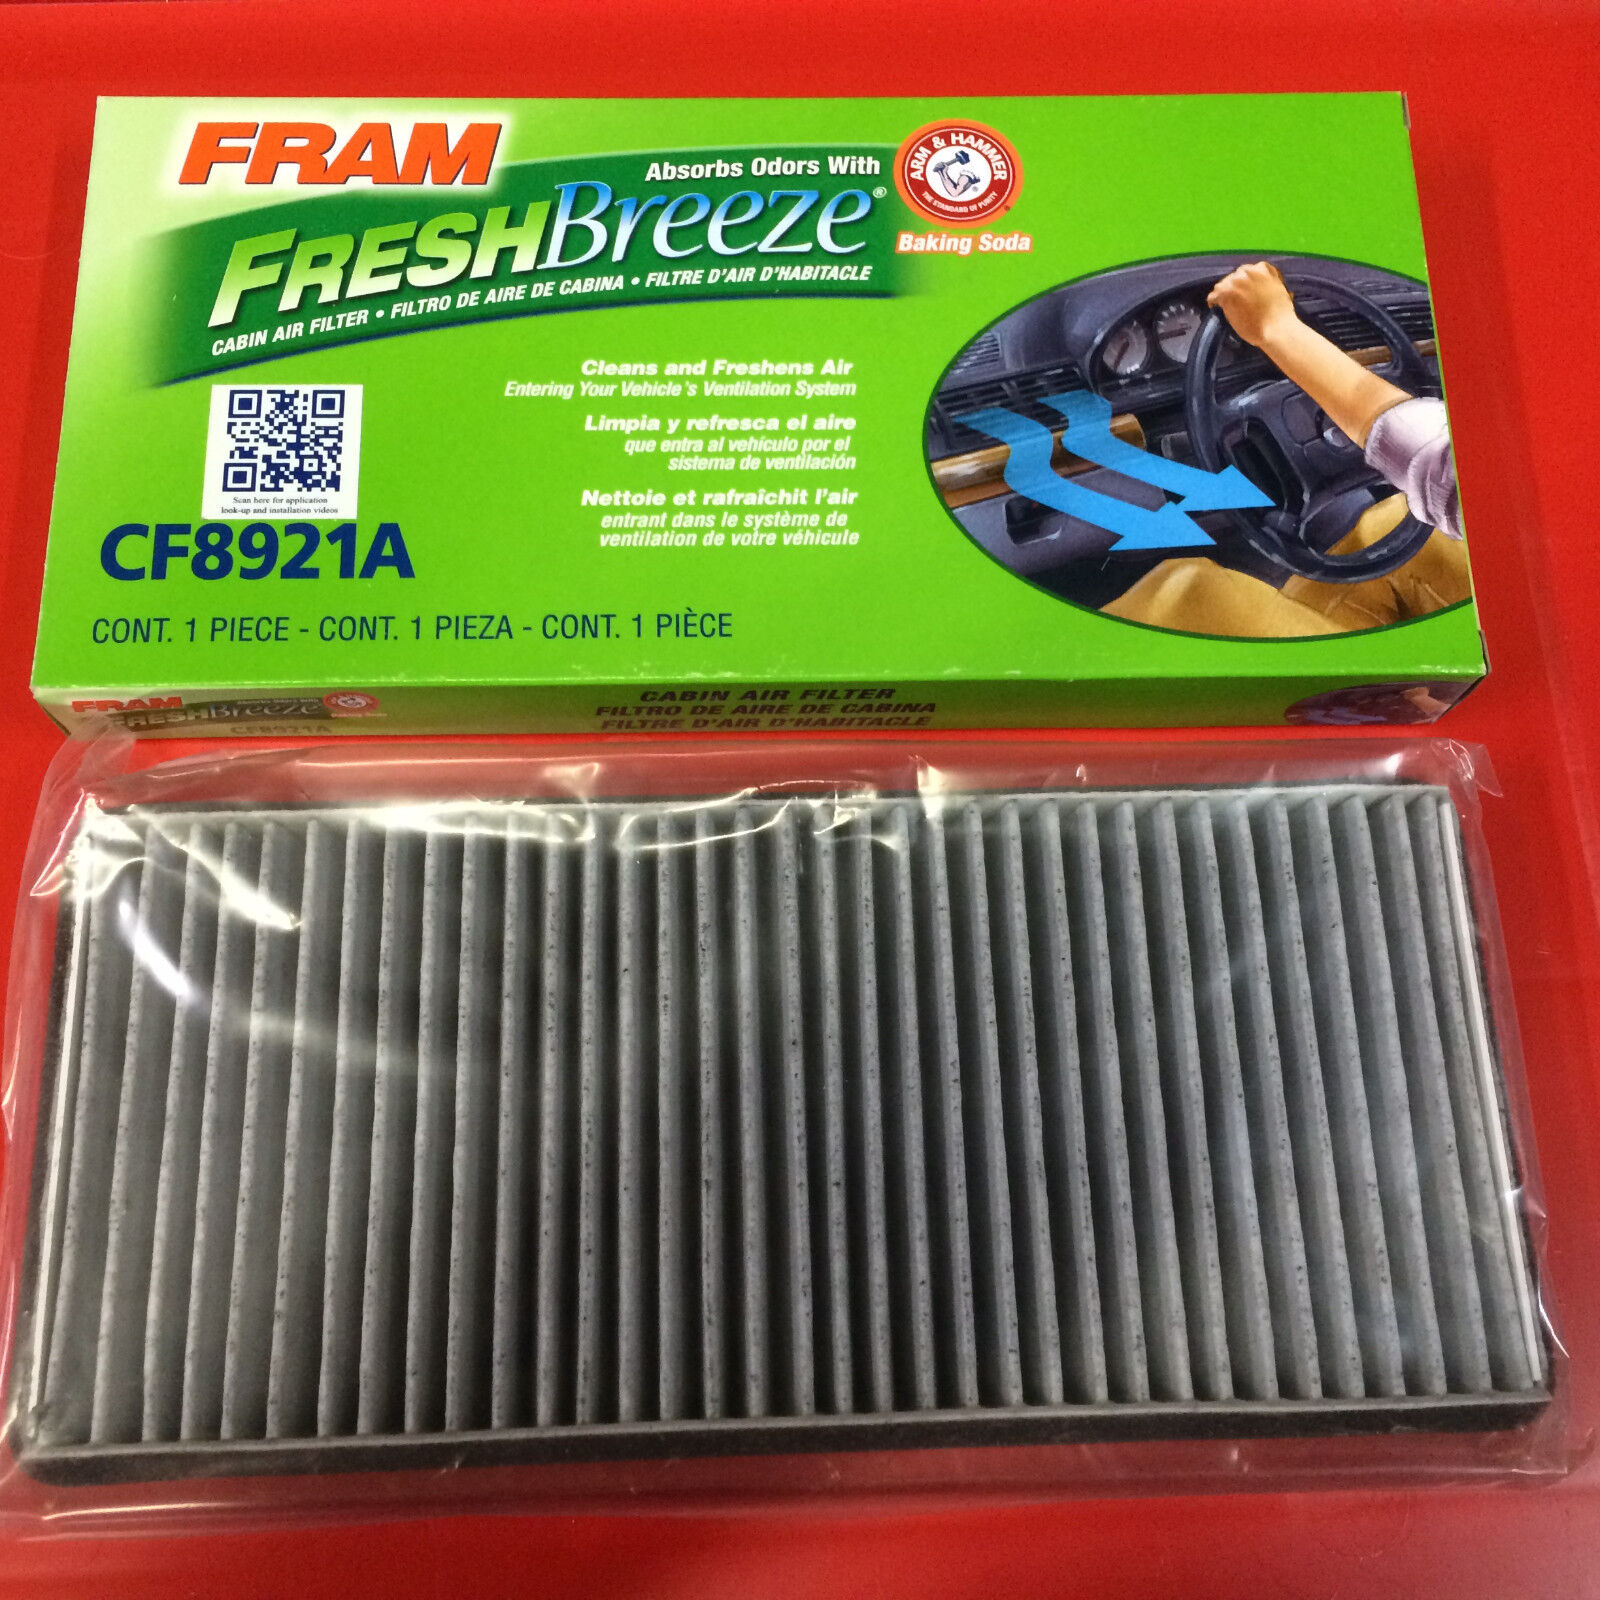 NEW Cabin Air Filter-Freshbreeze Fram CF8921A w/Arm Hammer Baking Soda FOR FORD 